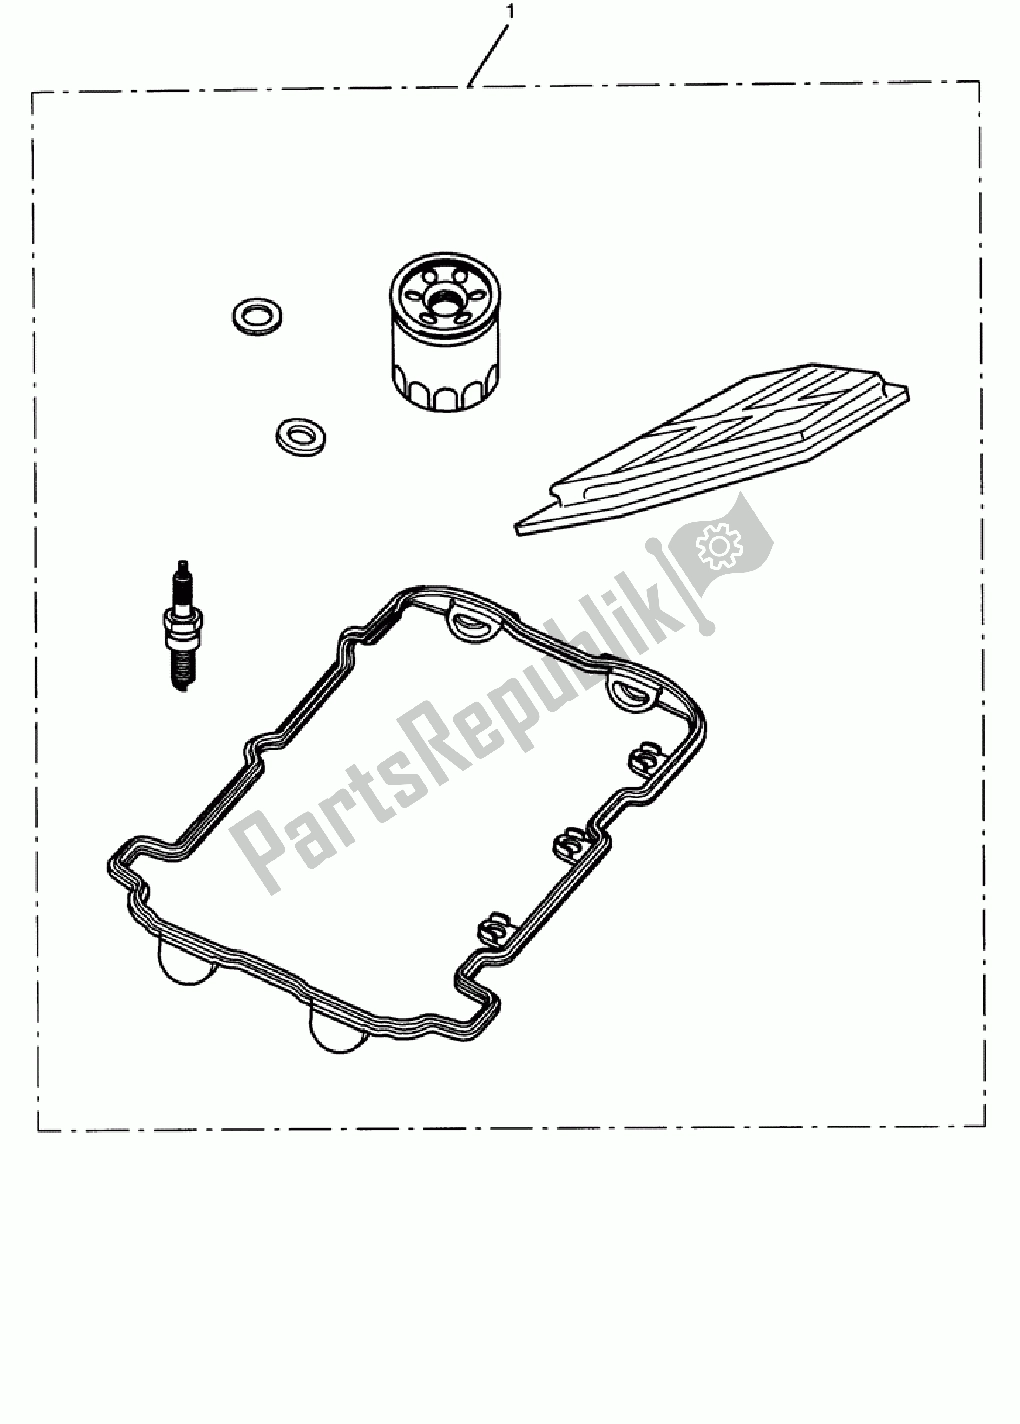 All parts for the Service Kits of the Triumph Speed Triple 1050 2008 - 2012